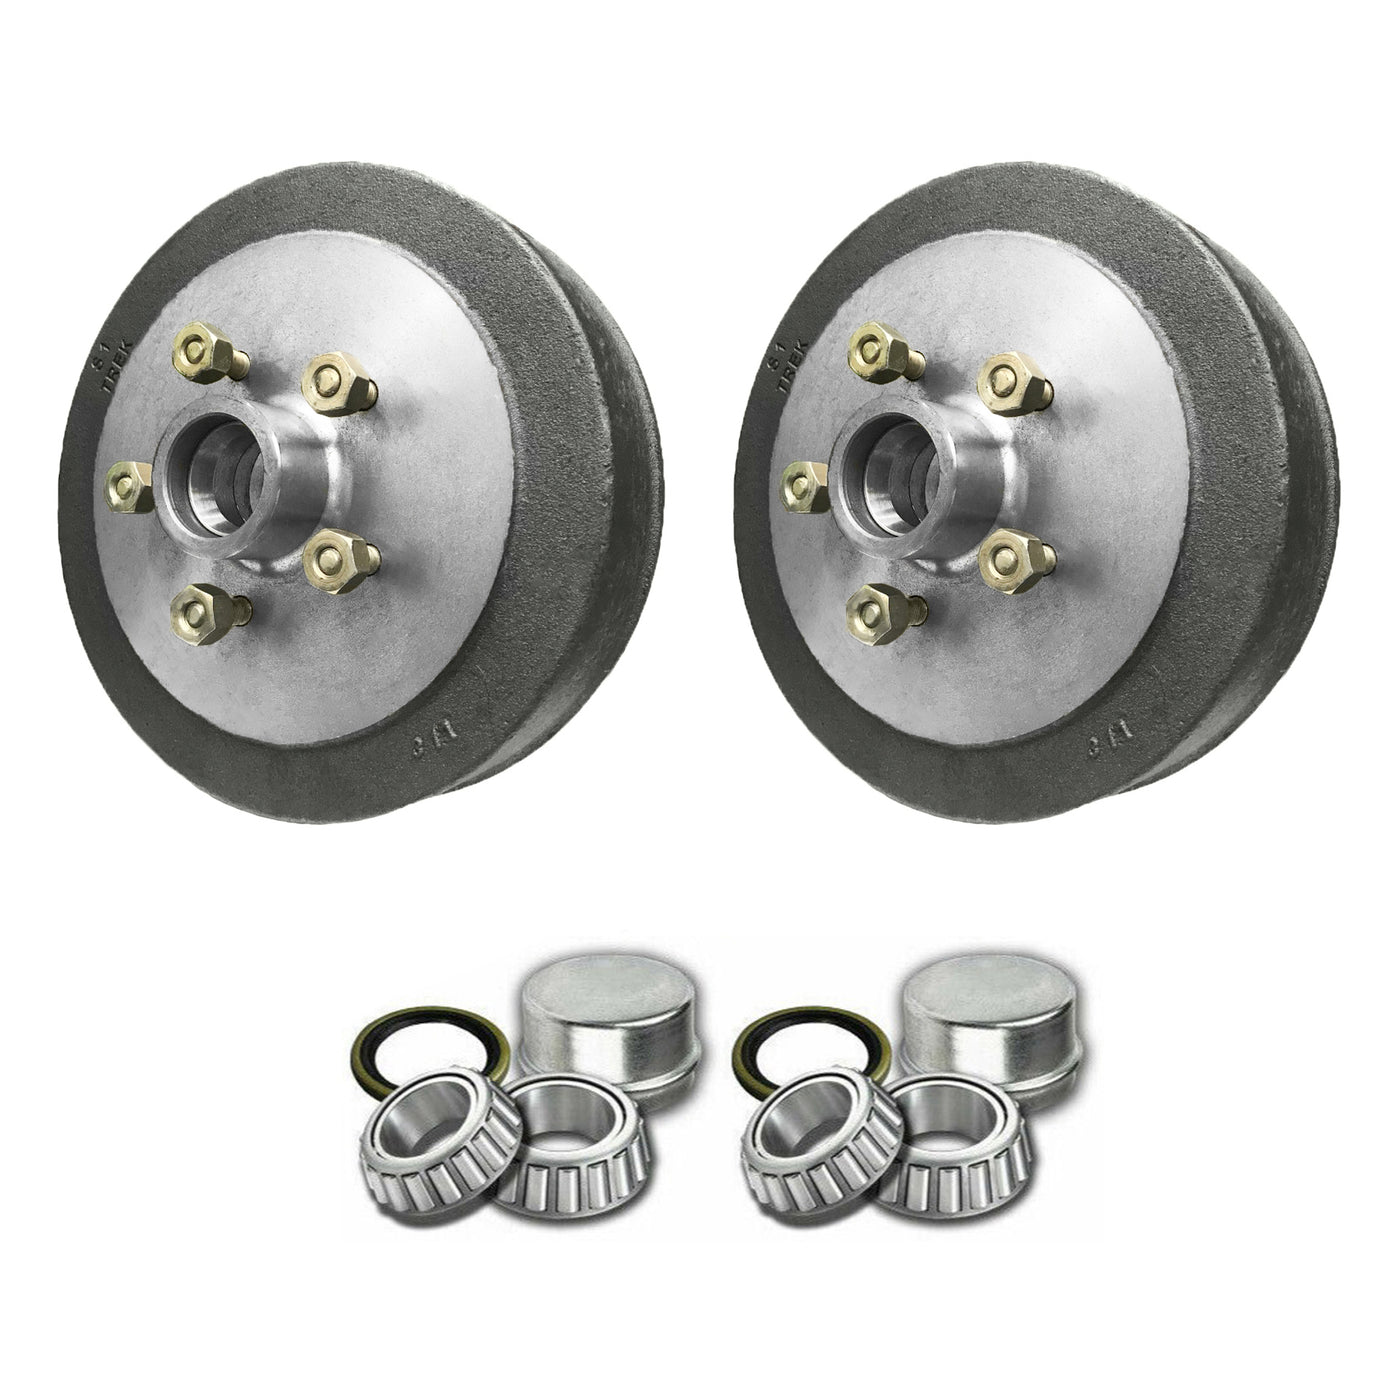 Pair Trailer 10 inch Hub Drums & LM Bearings Suit Electric Hydraulic Setup Suits HT Holden